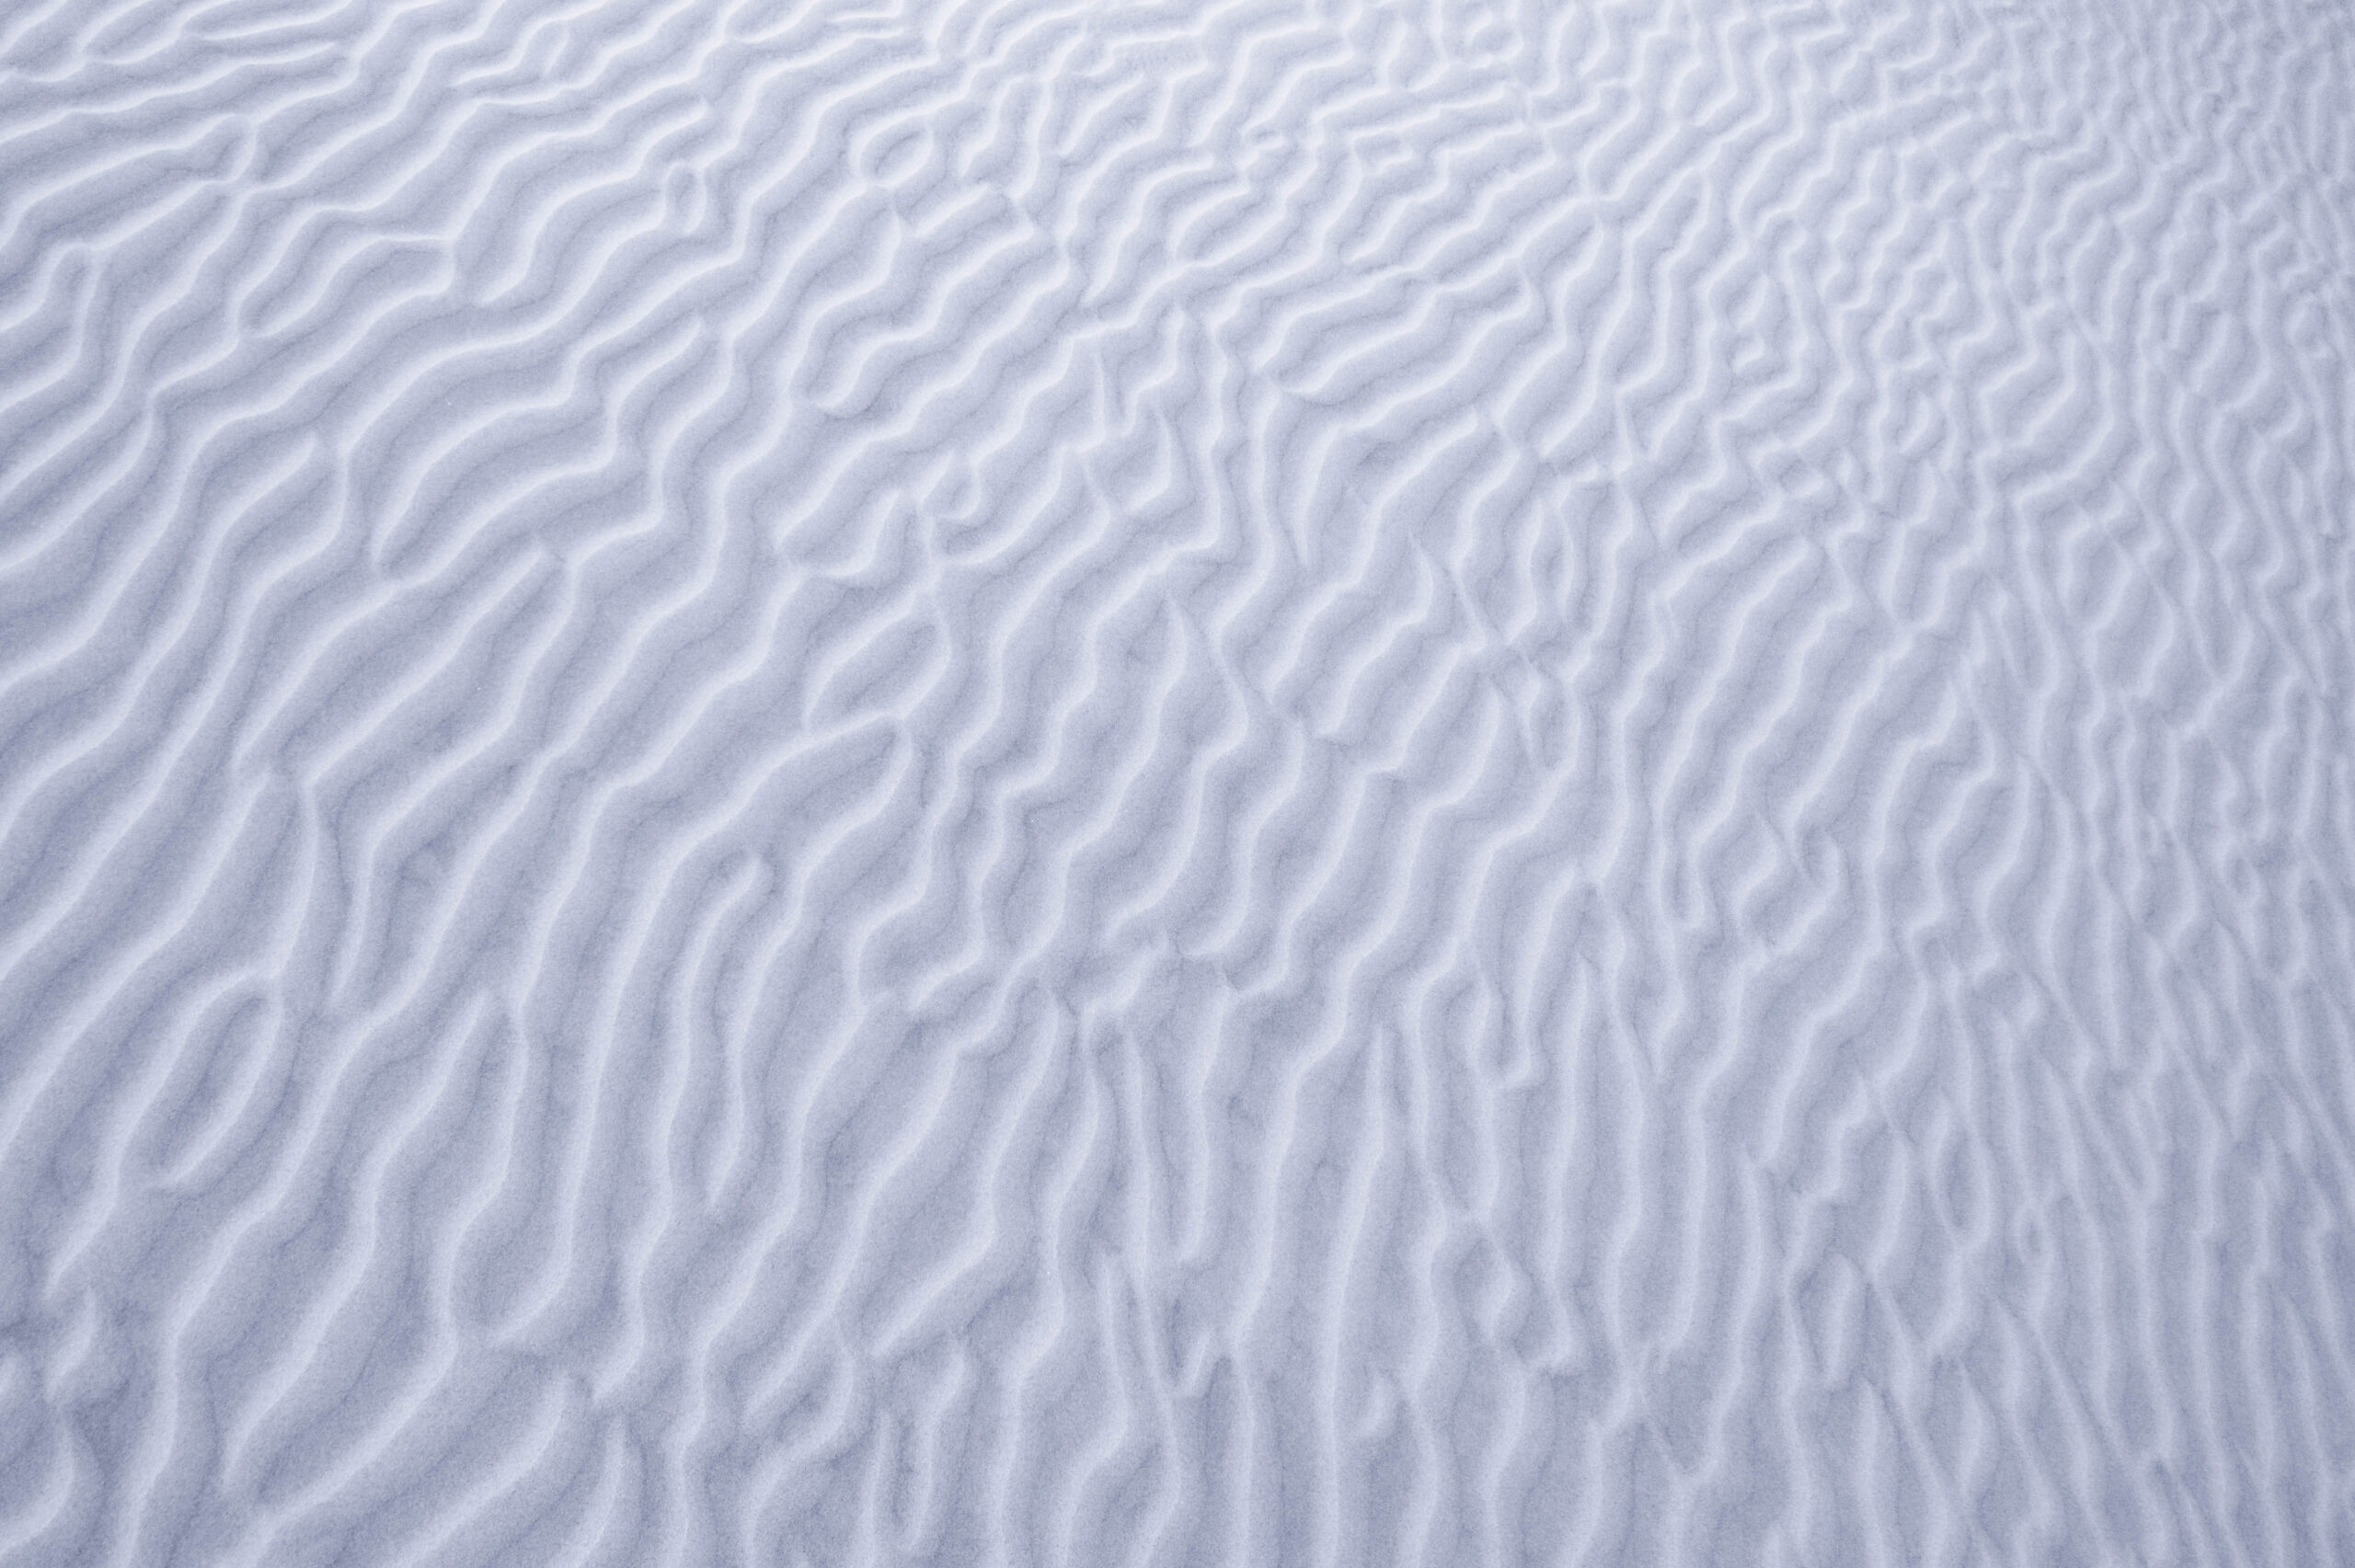 Abstract landscape photography of windblown patterns in a sand dune.